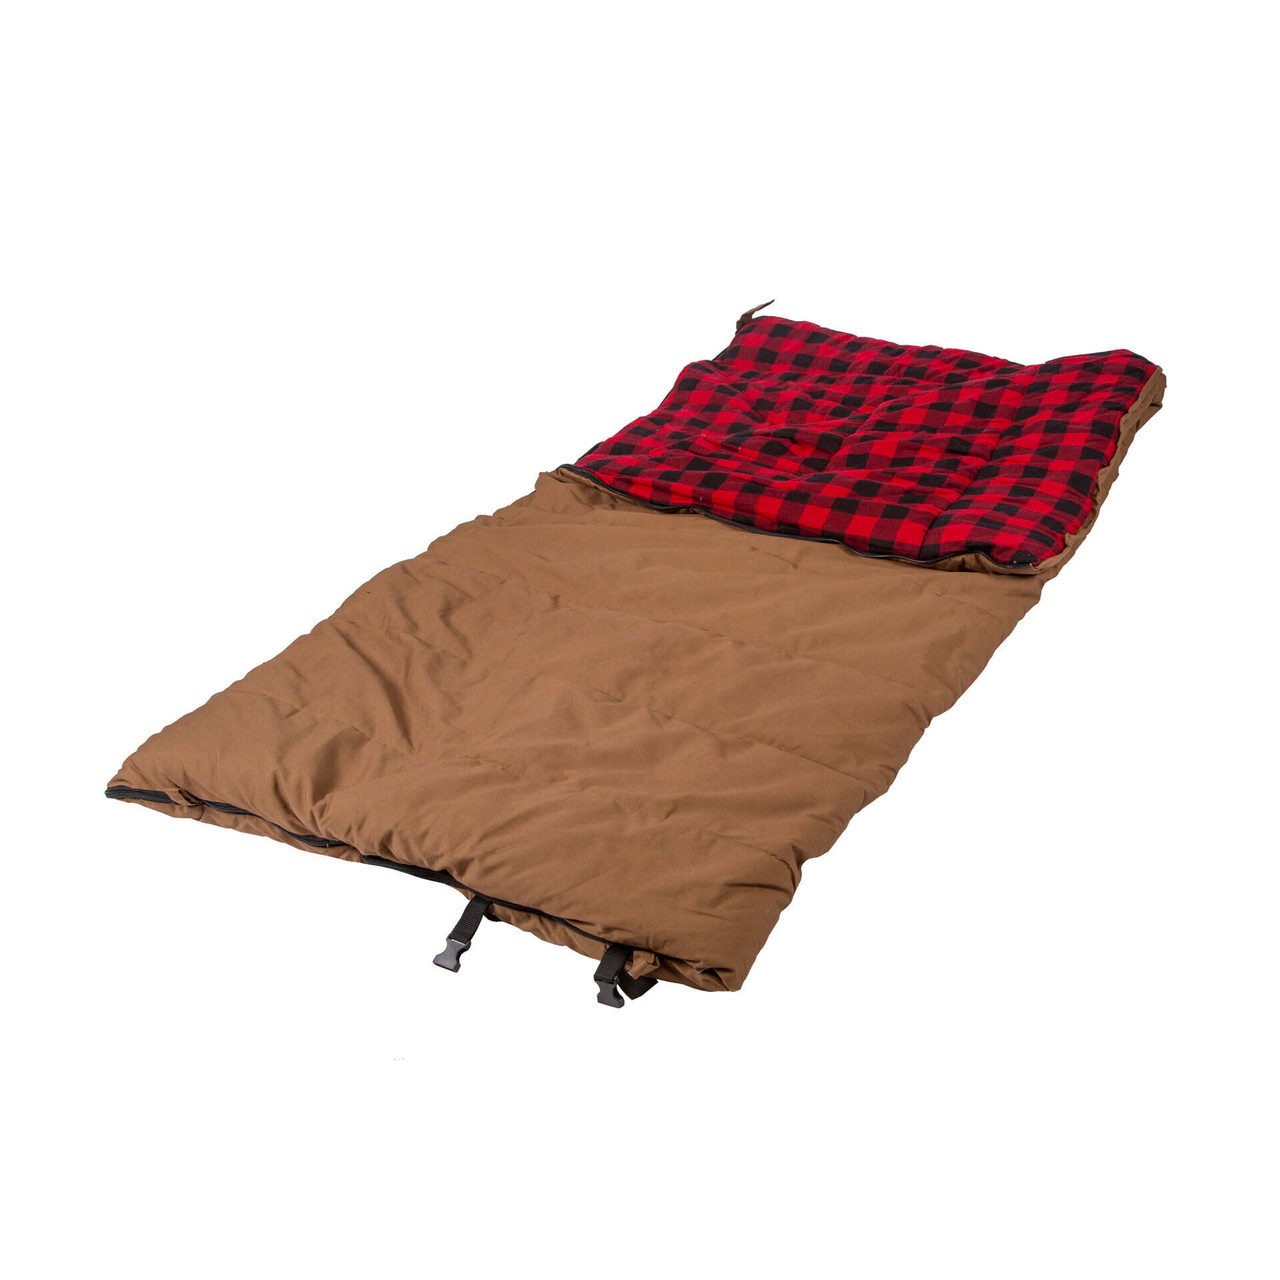 Stansport 6lb Grizzly Sleeping Bag